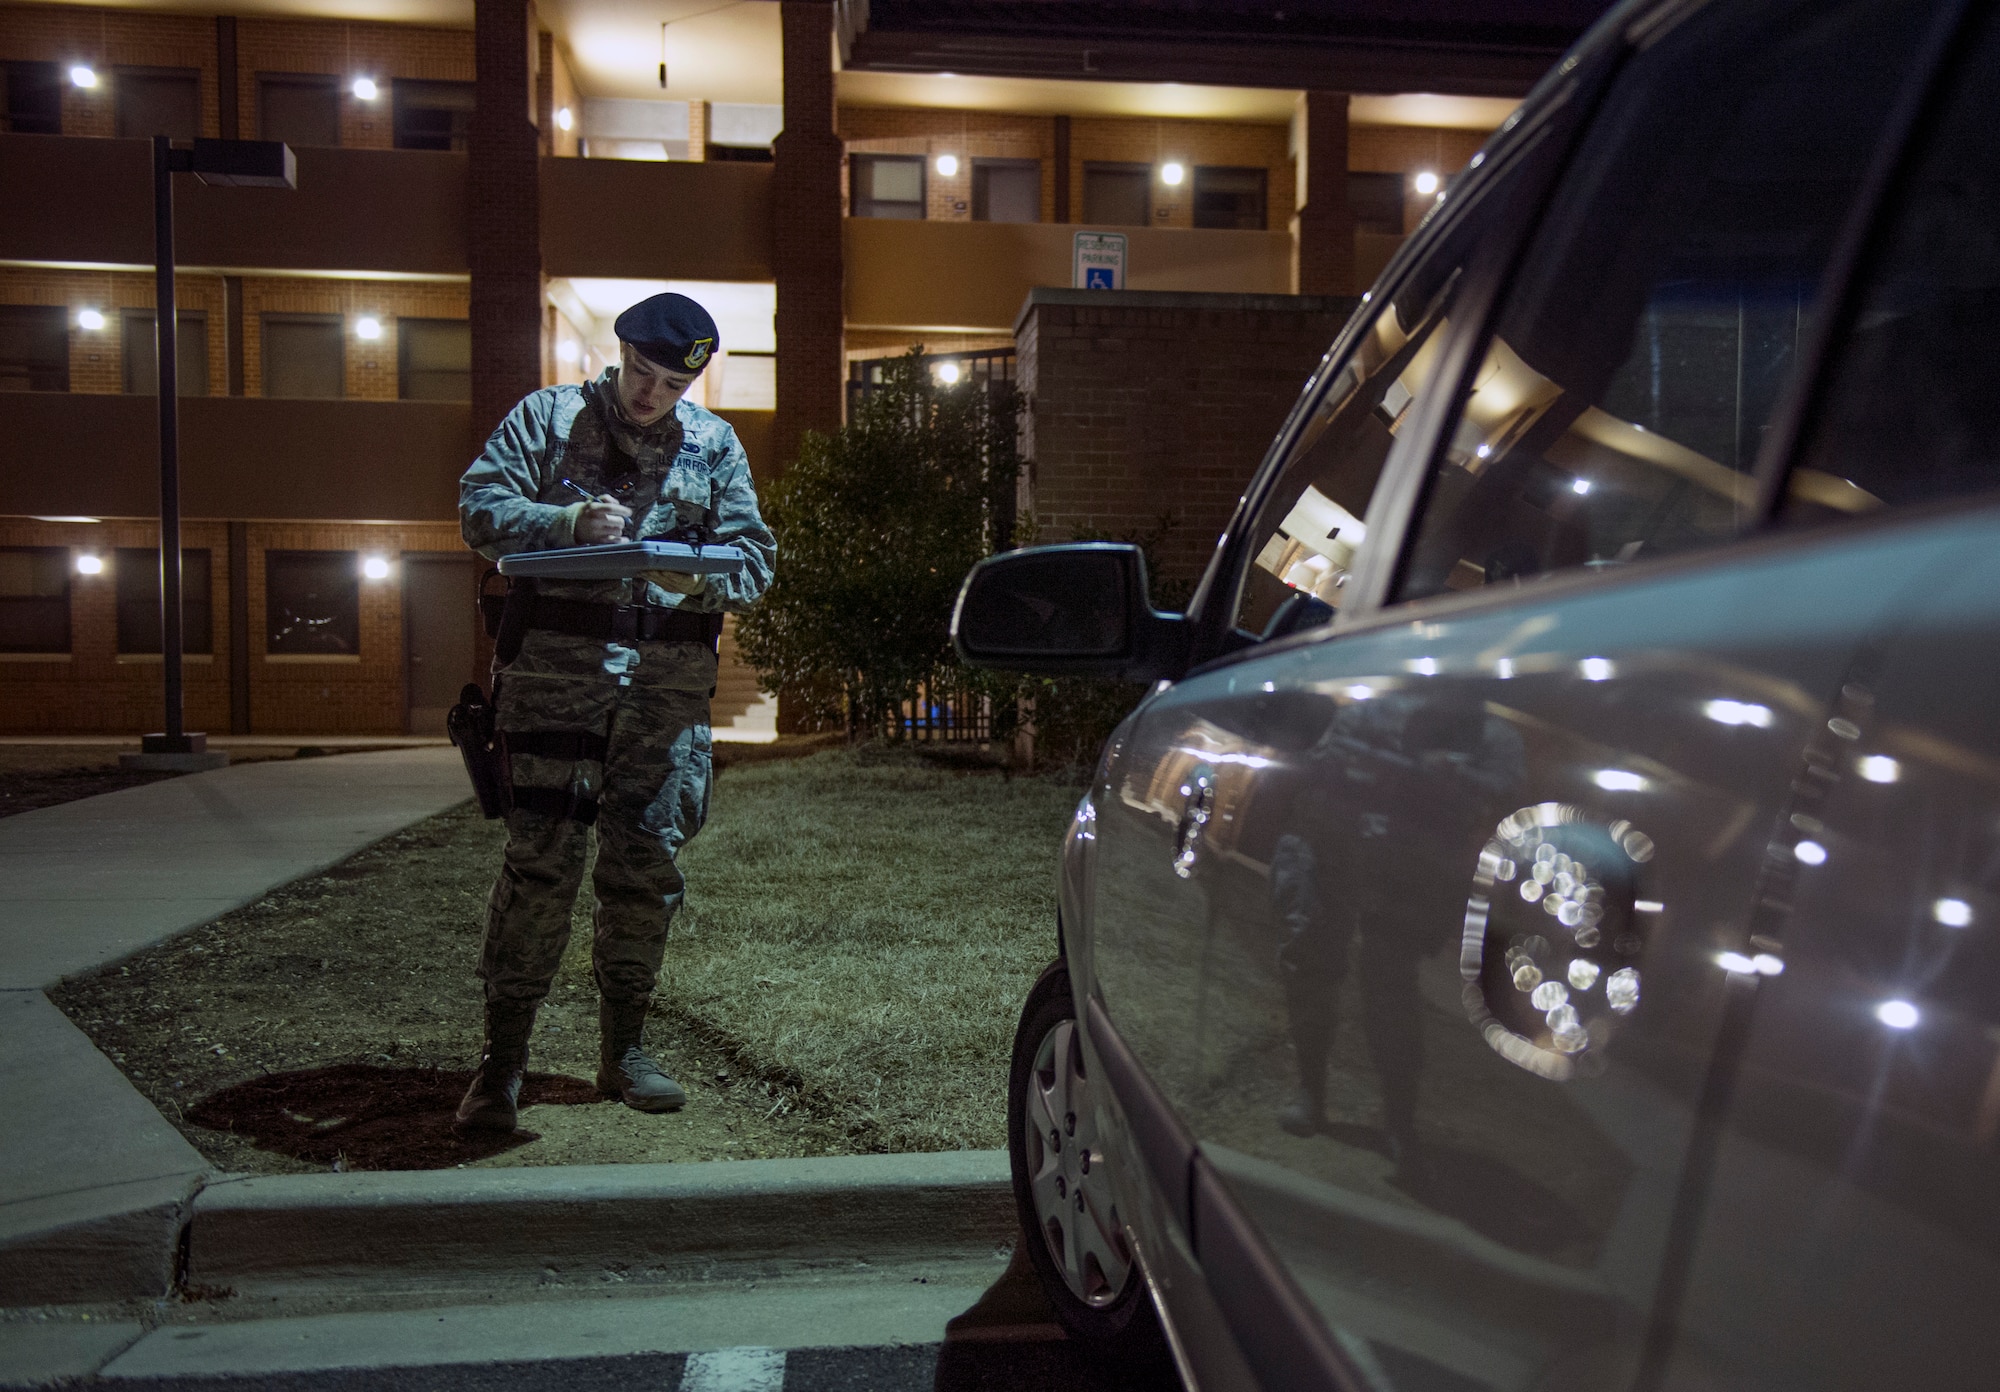 Airman 1st Class Kaitlyn Evans prepares a vehicle parking ticket during her night-shift duty at Joint Base Andrews, Maryland. Evans maintains proficiency while balancing her career and ownership of a horse with support from friends and family. She is an 11th Security Forces Squadron patrolman at Andrews Air Force Base, Maryland. (U.S. Air Force photo/Staff Sgt. Vernon Young Jr.)